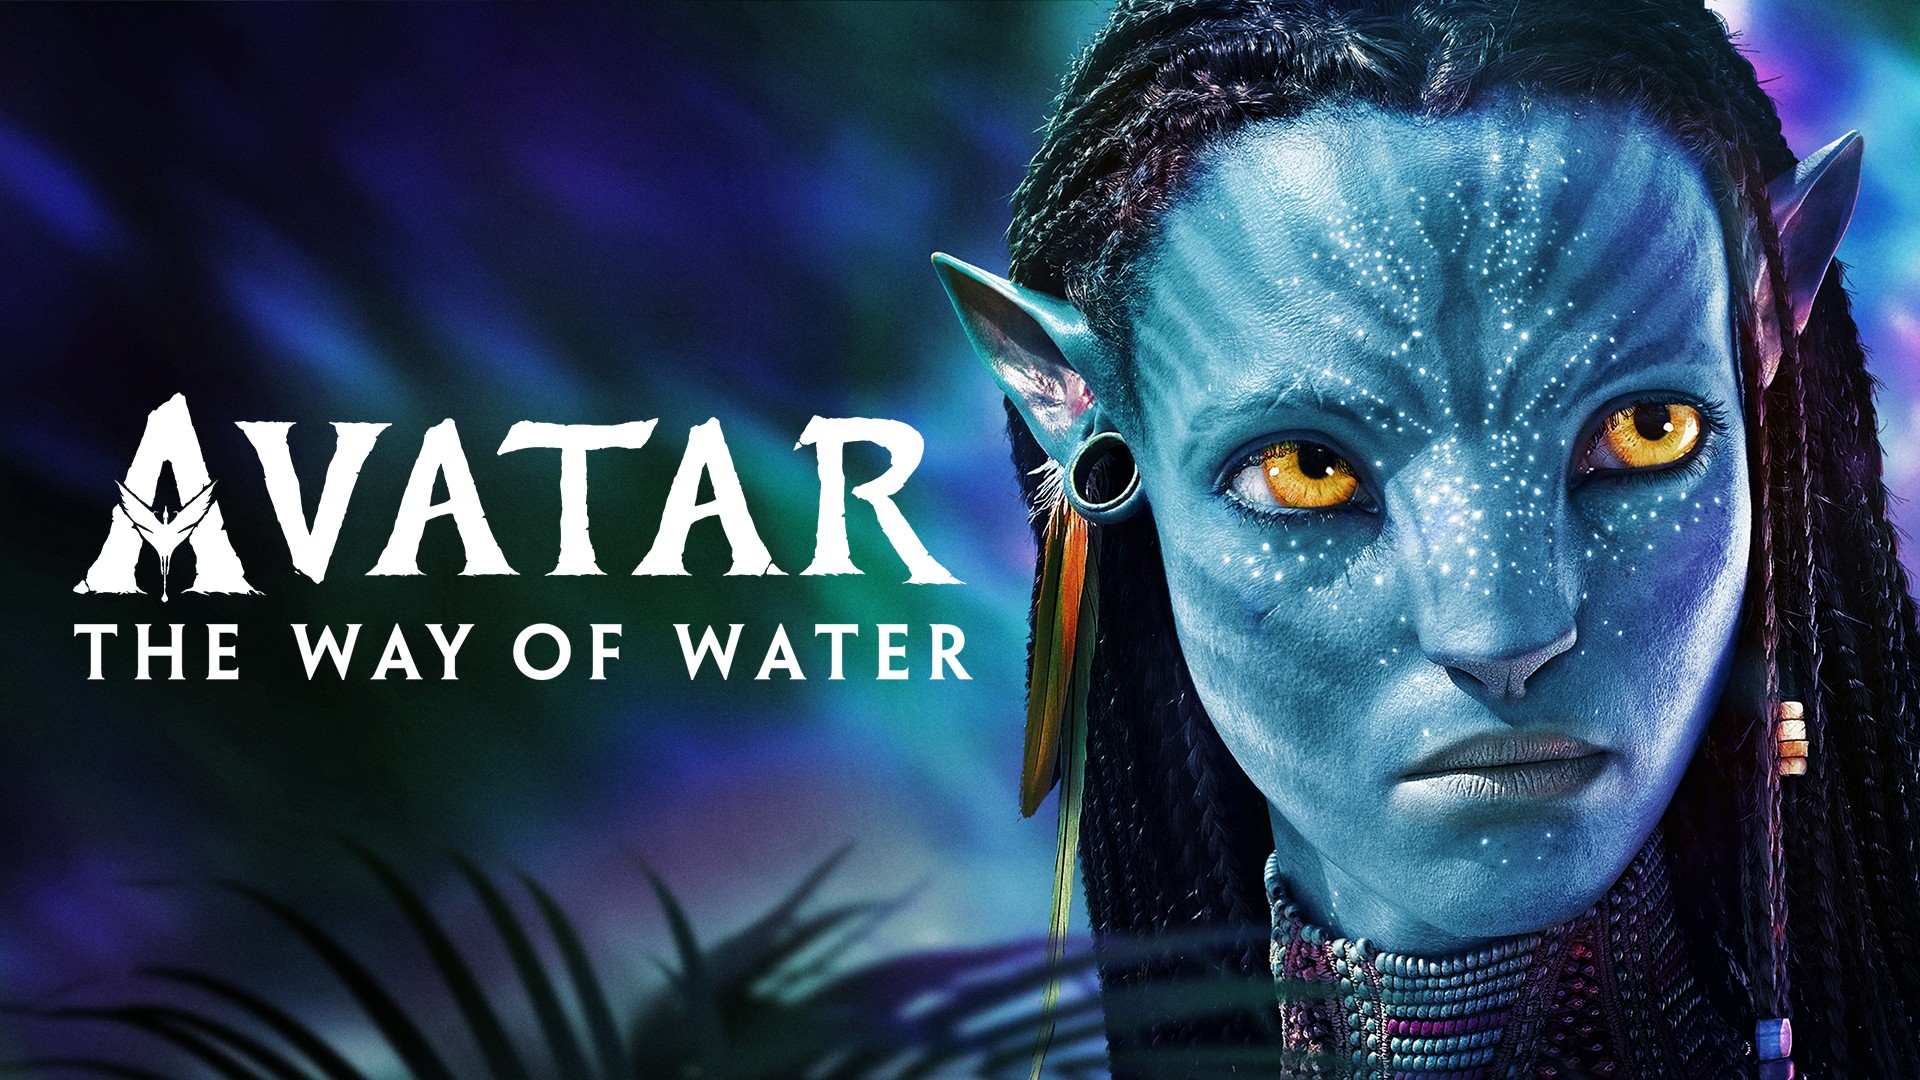 Avatar: The Way of Water (2022) - SoP